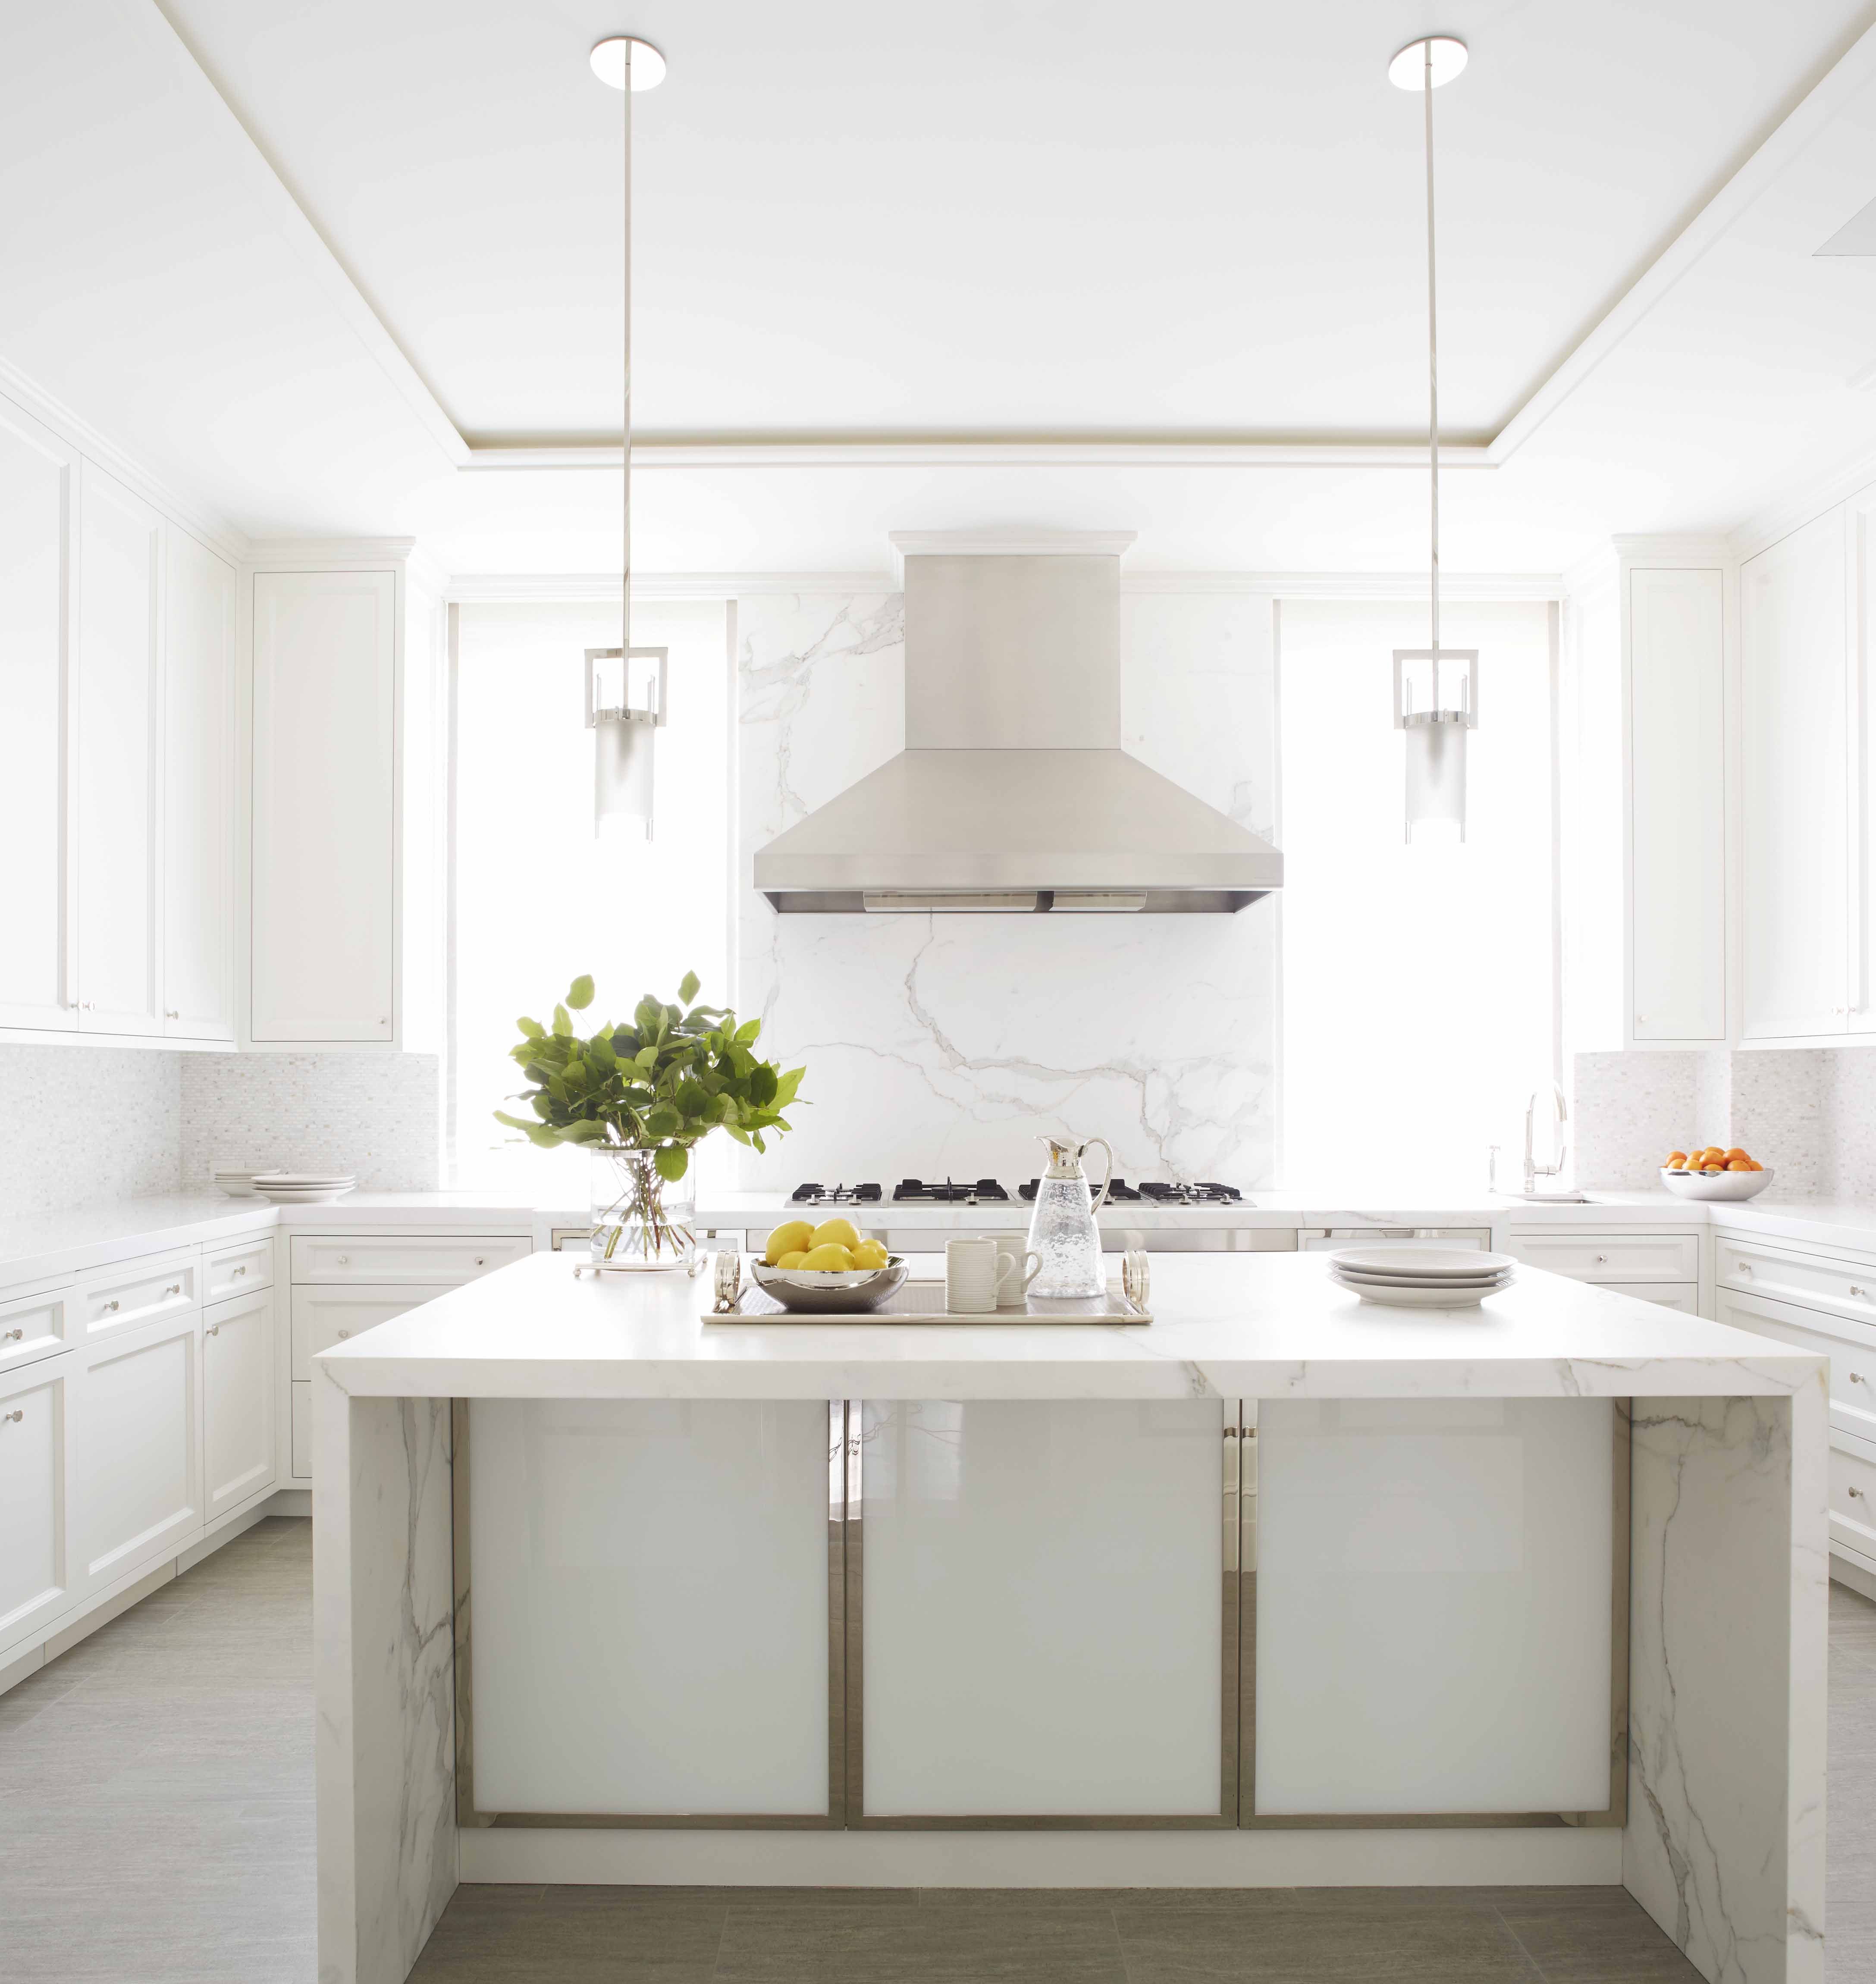 Best Backsplash For All White Kitchen Smooth May Be The Logical